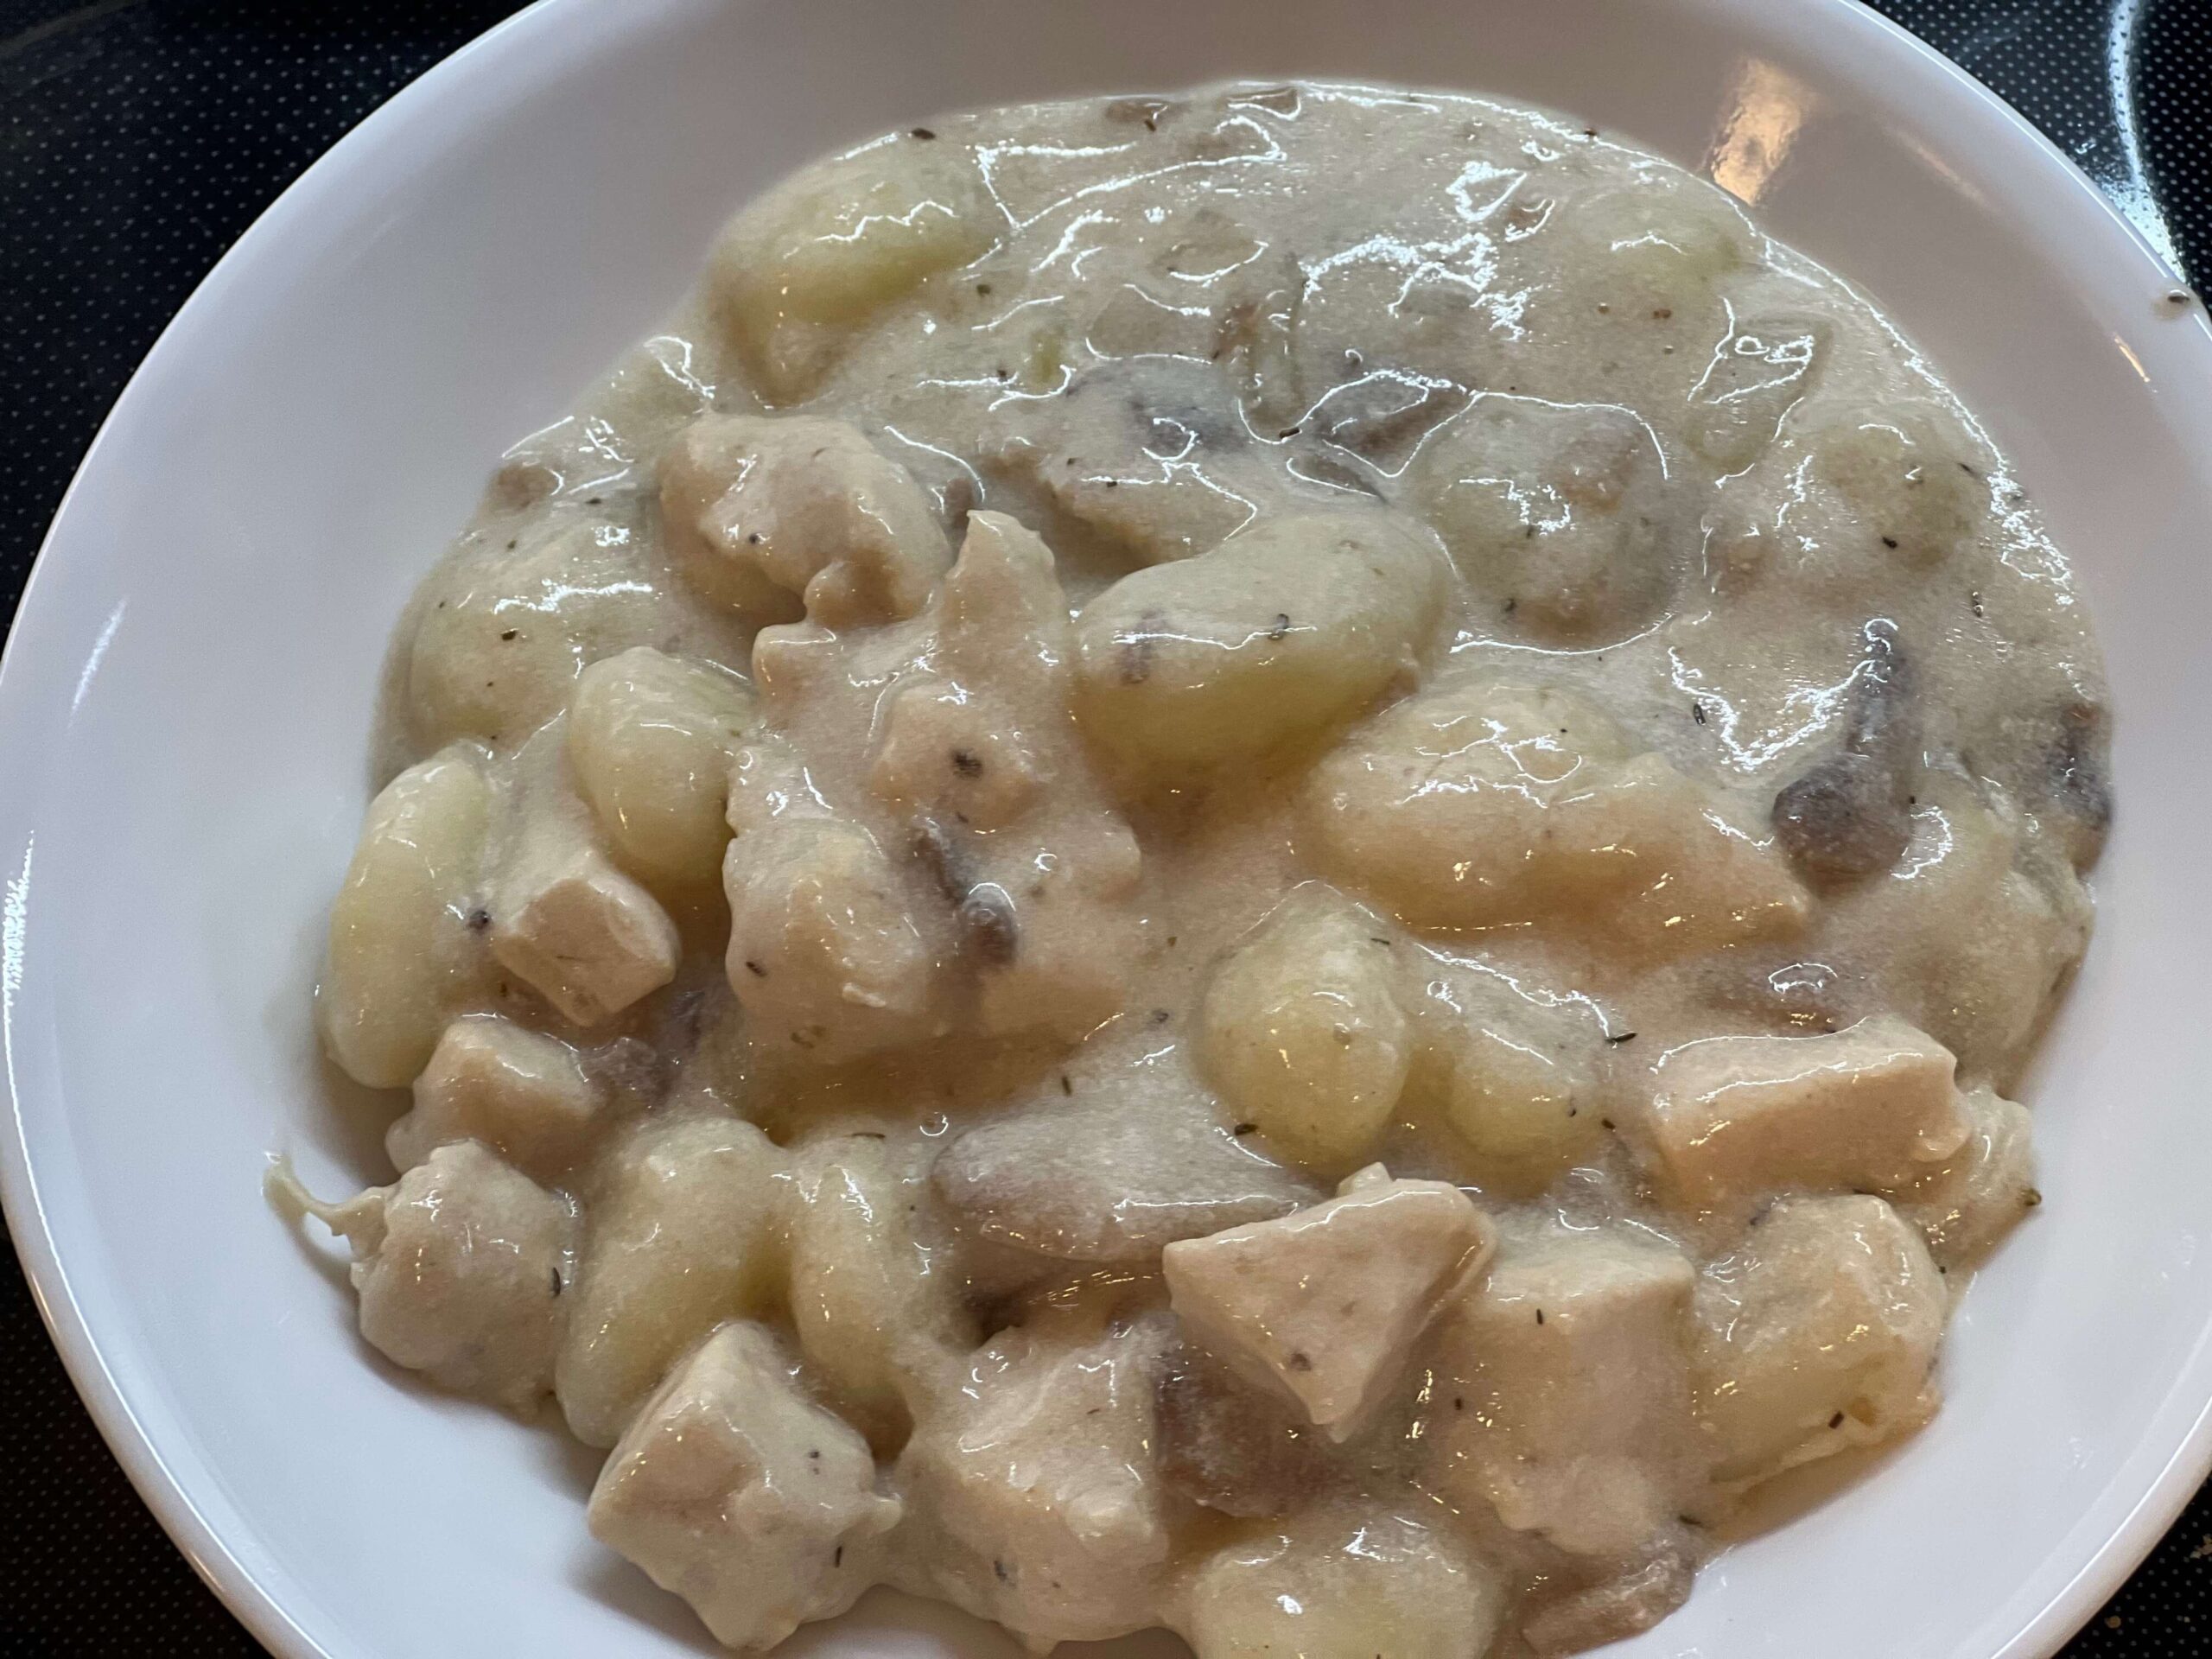 Mushroom Chicken Gnocchi, hot and ready to eat!